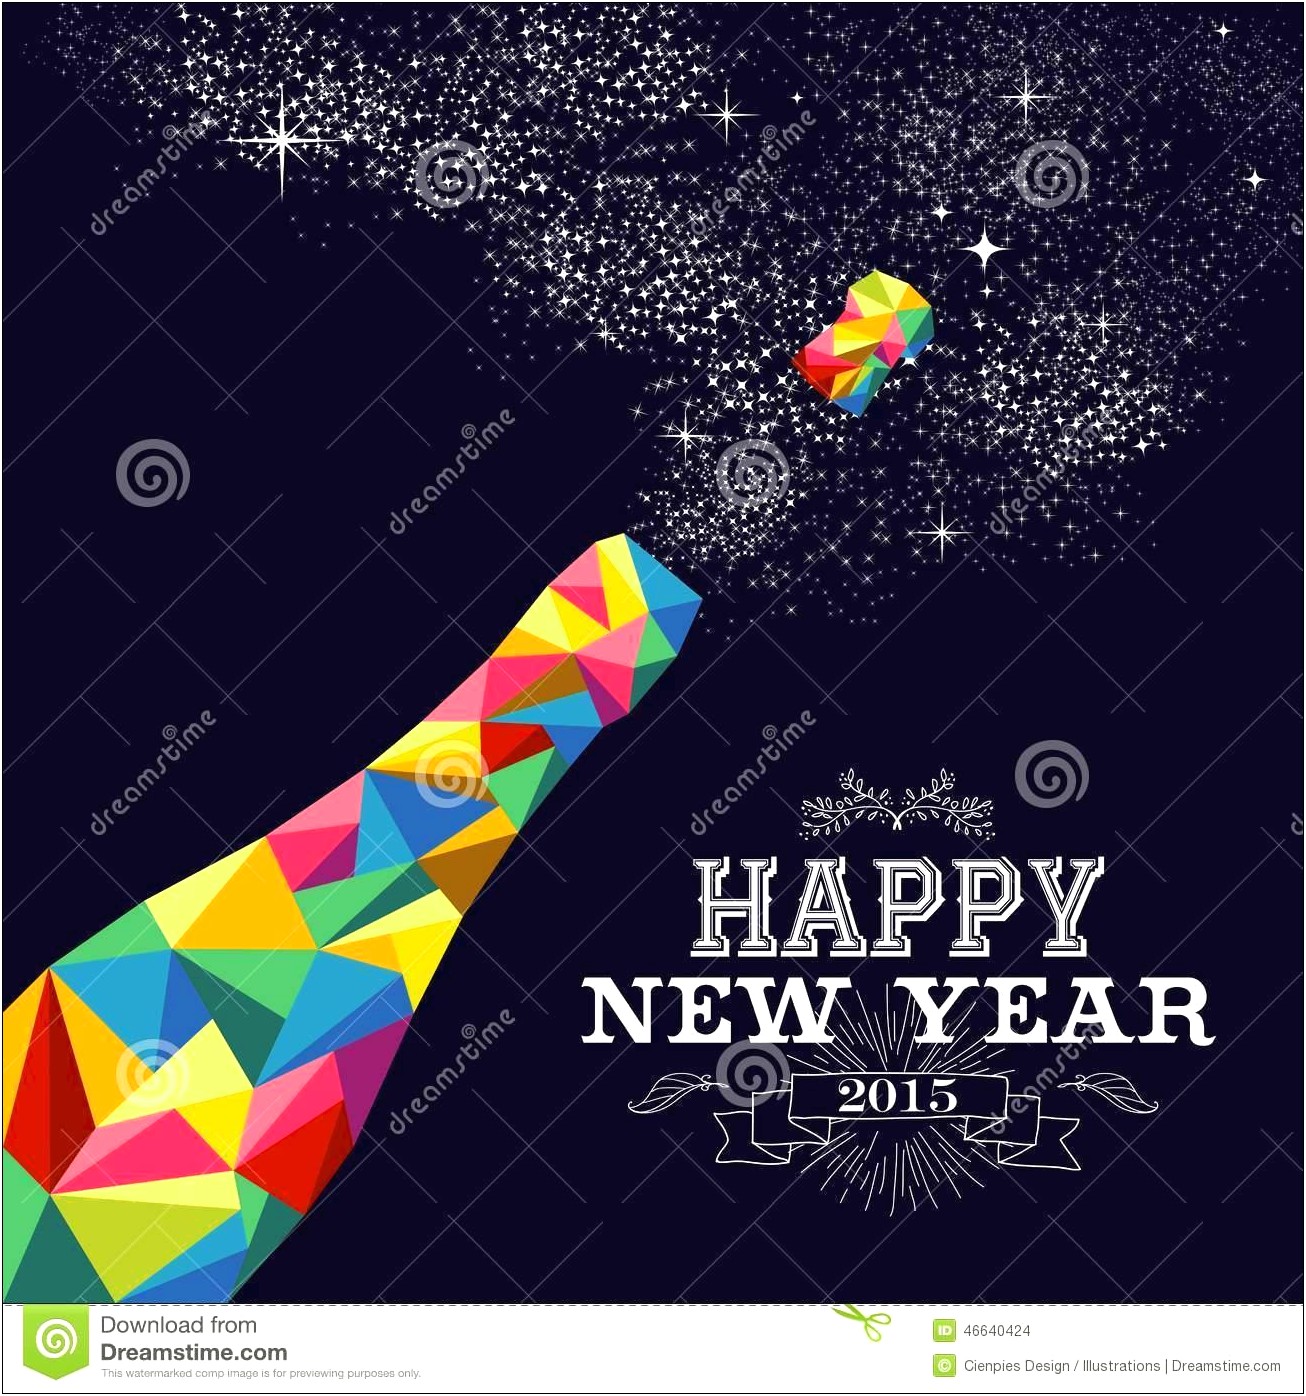 Happy New Year Flyer Templates Free 2015